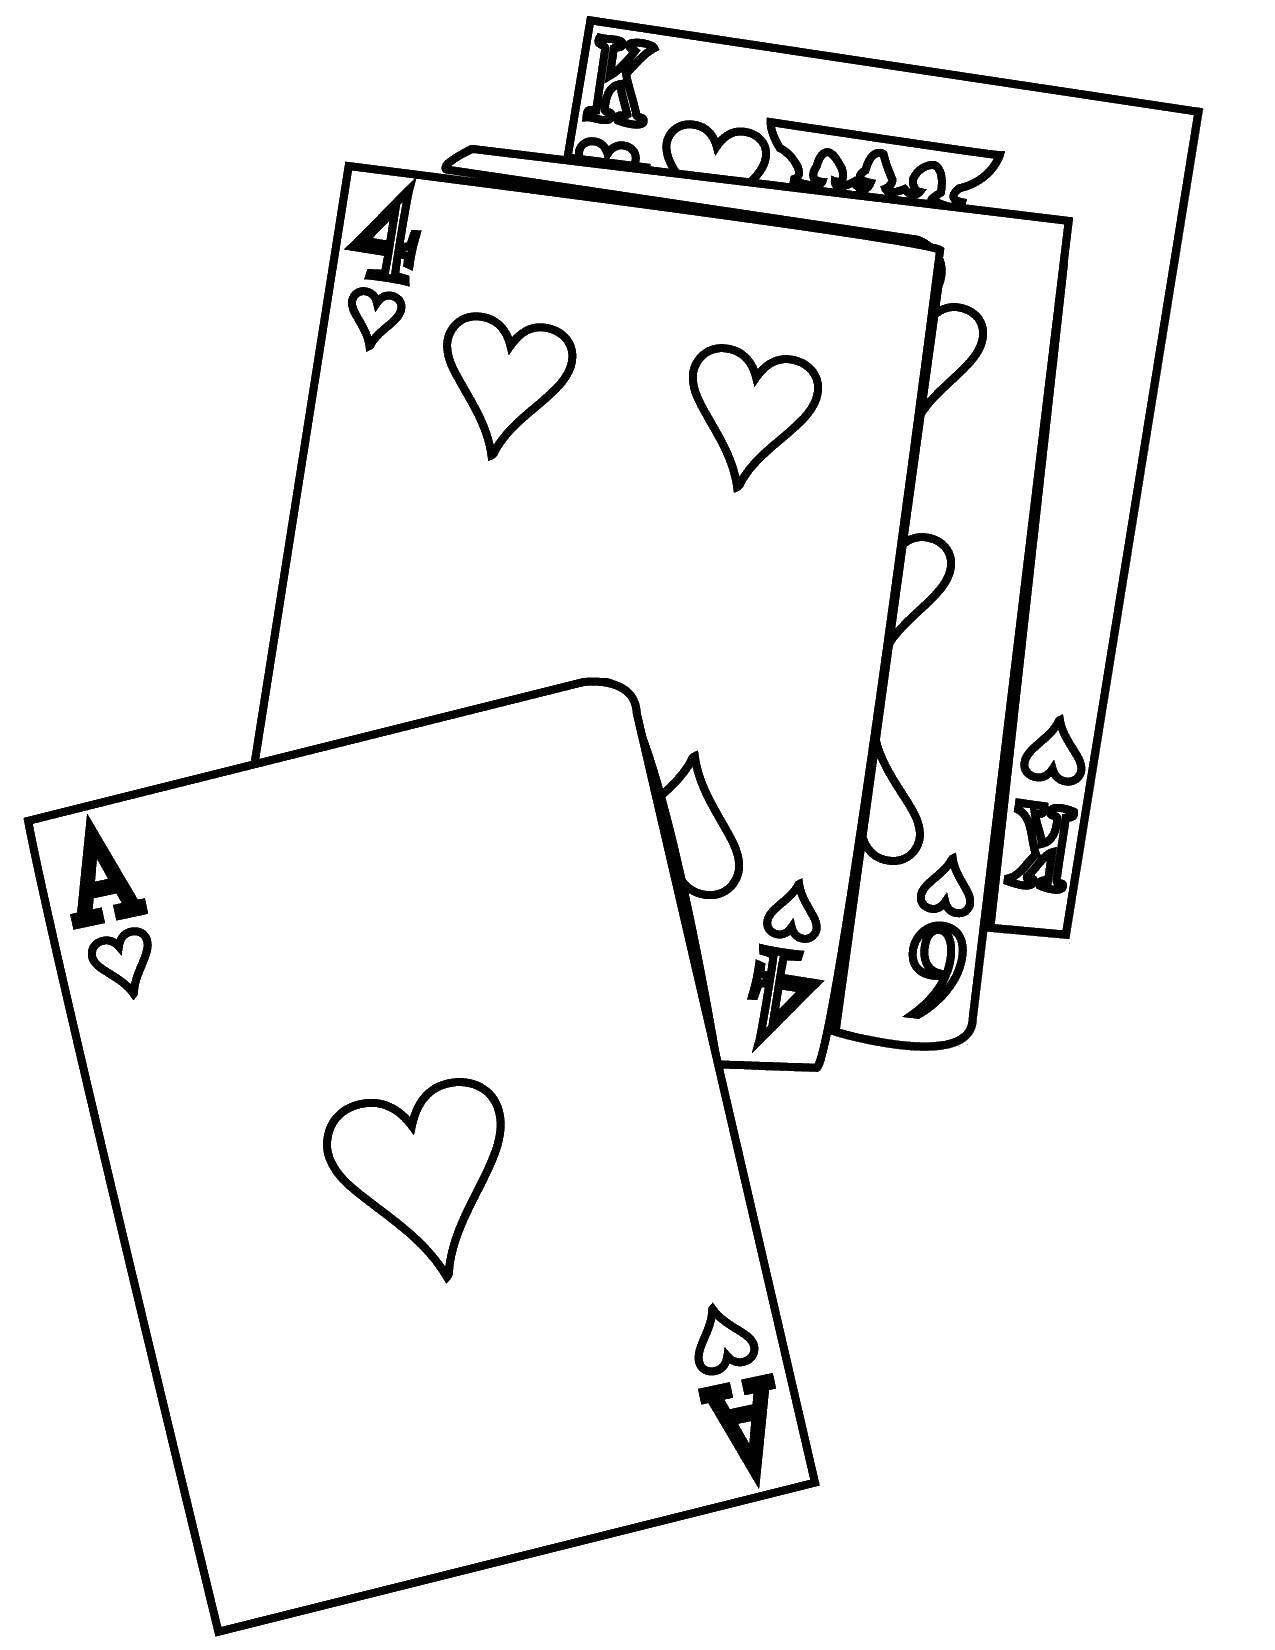 Coloring Playing cards. Category games. Tags:  cards , playing.